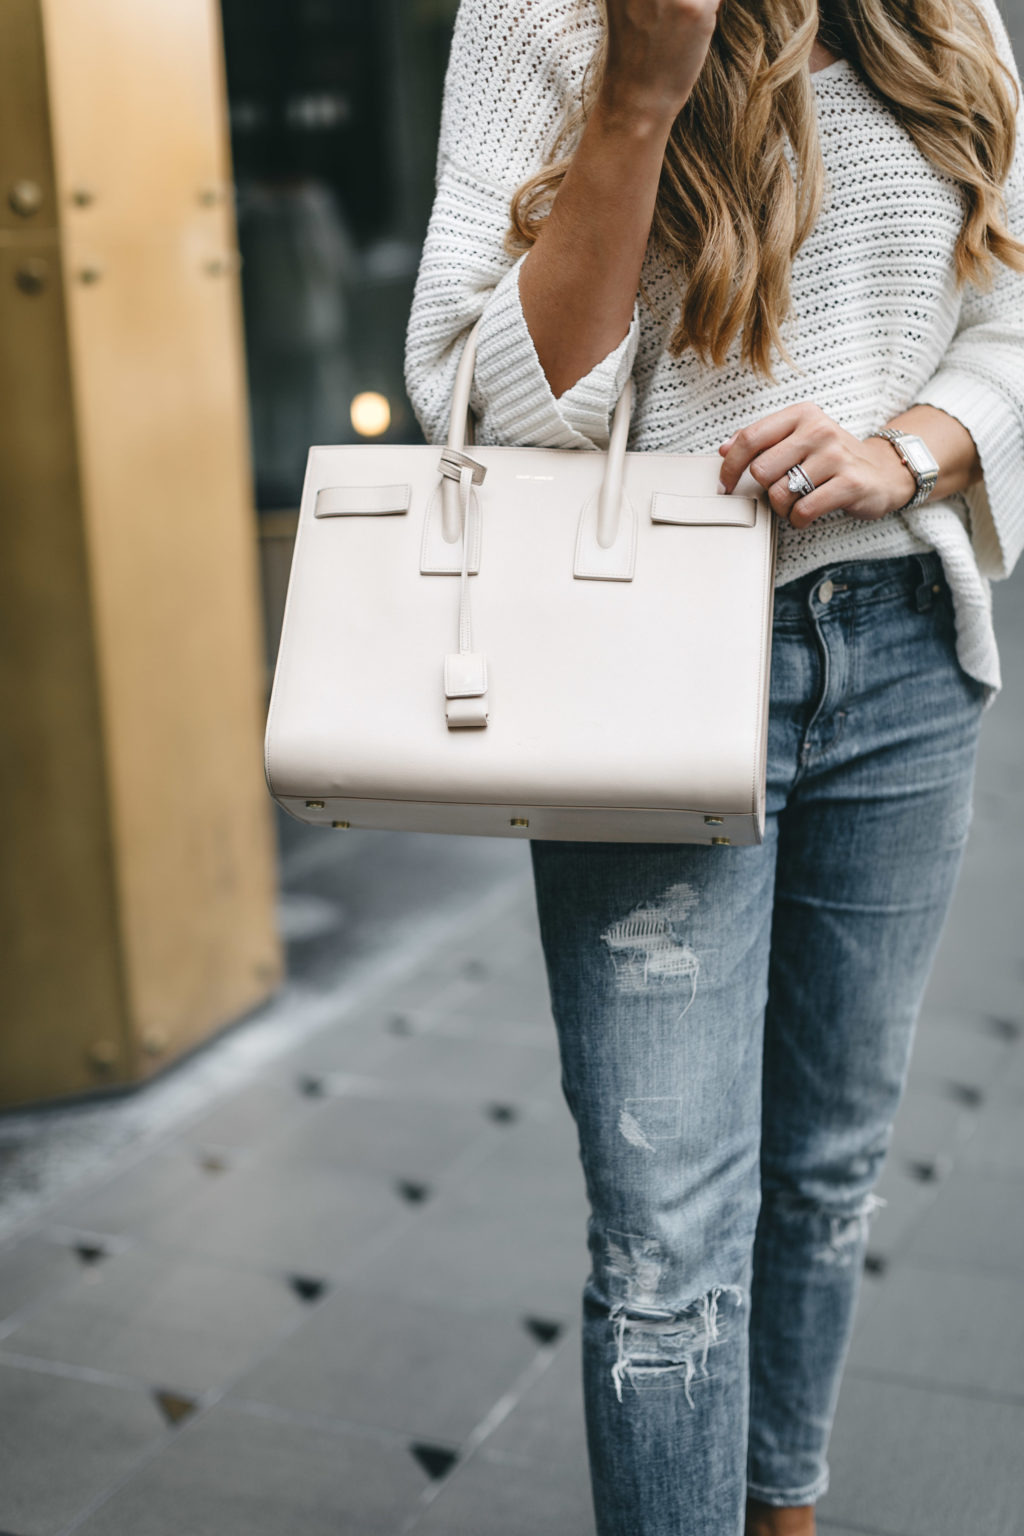 Saint Laurent bag and ripped jeans